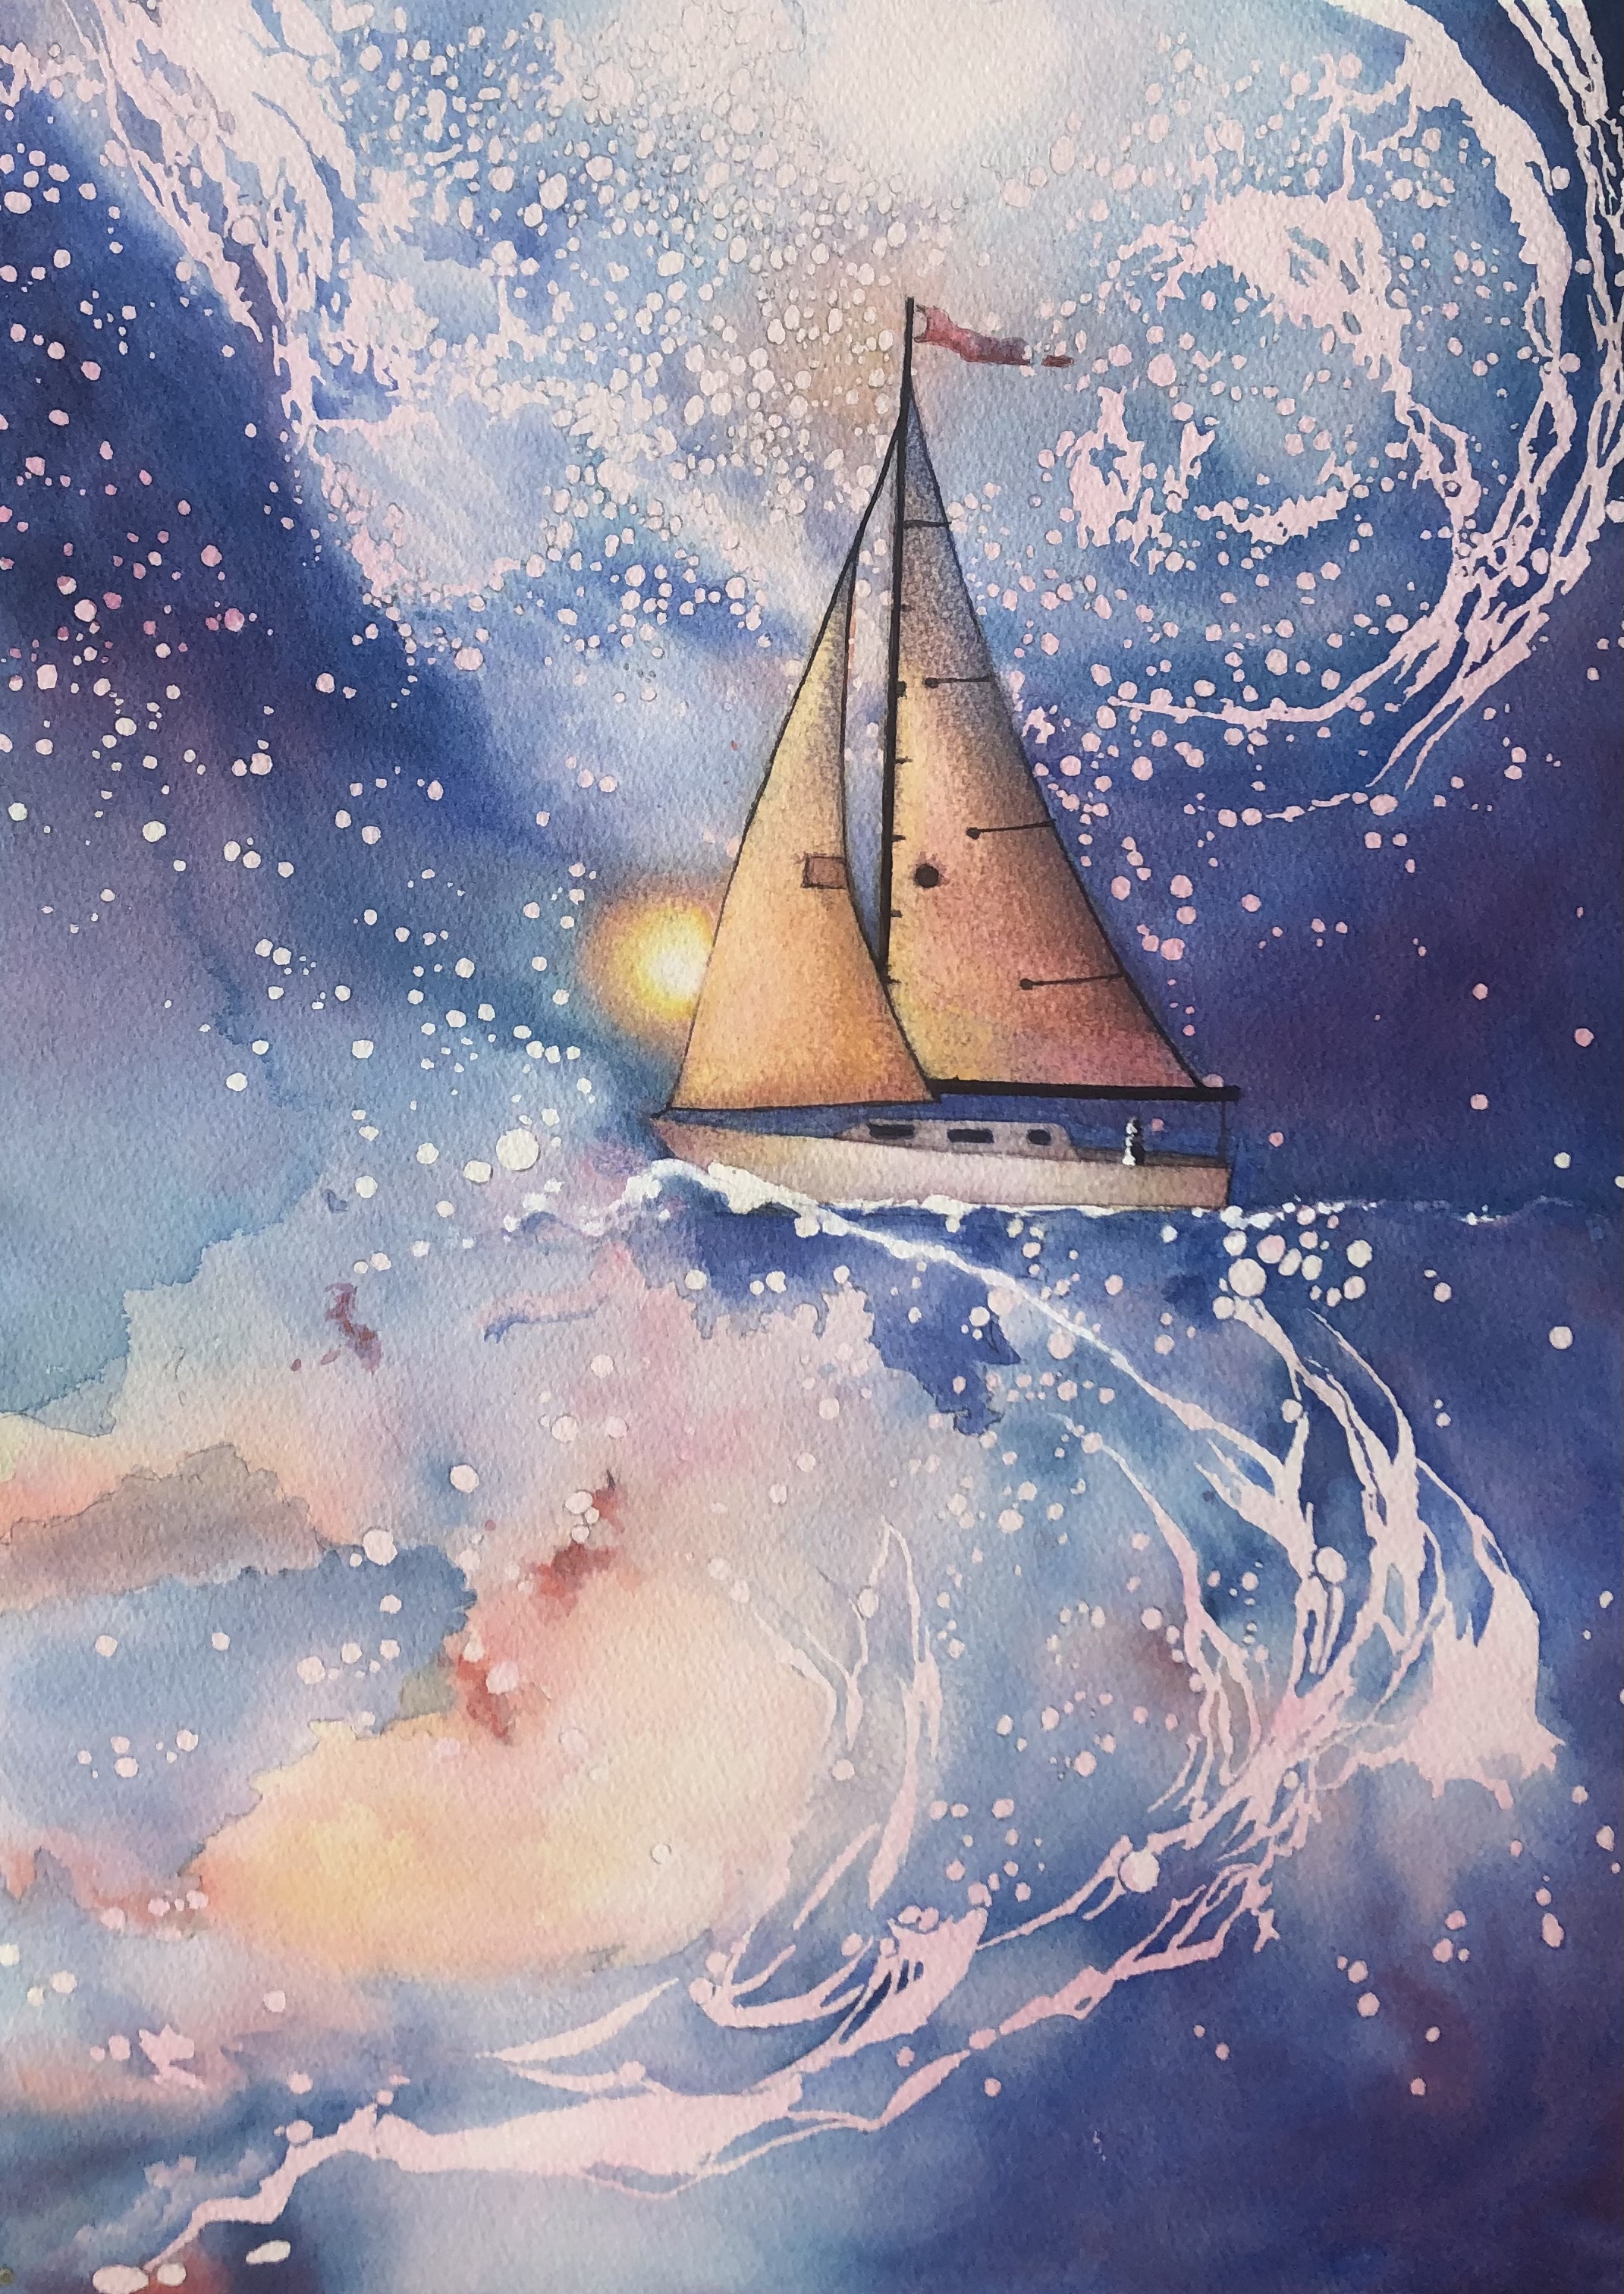 The Final Sail - 20 in x 14.5 in Watercolor